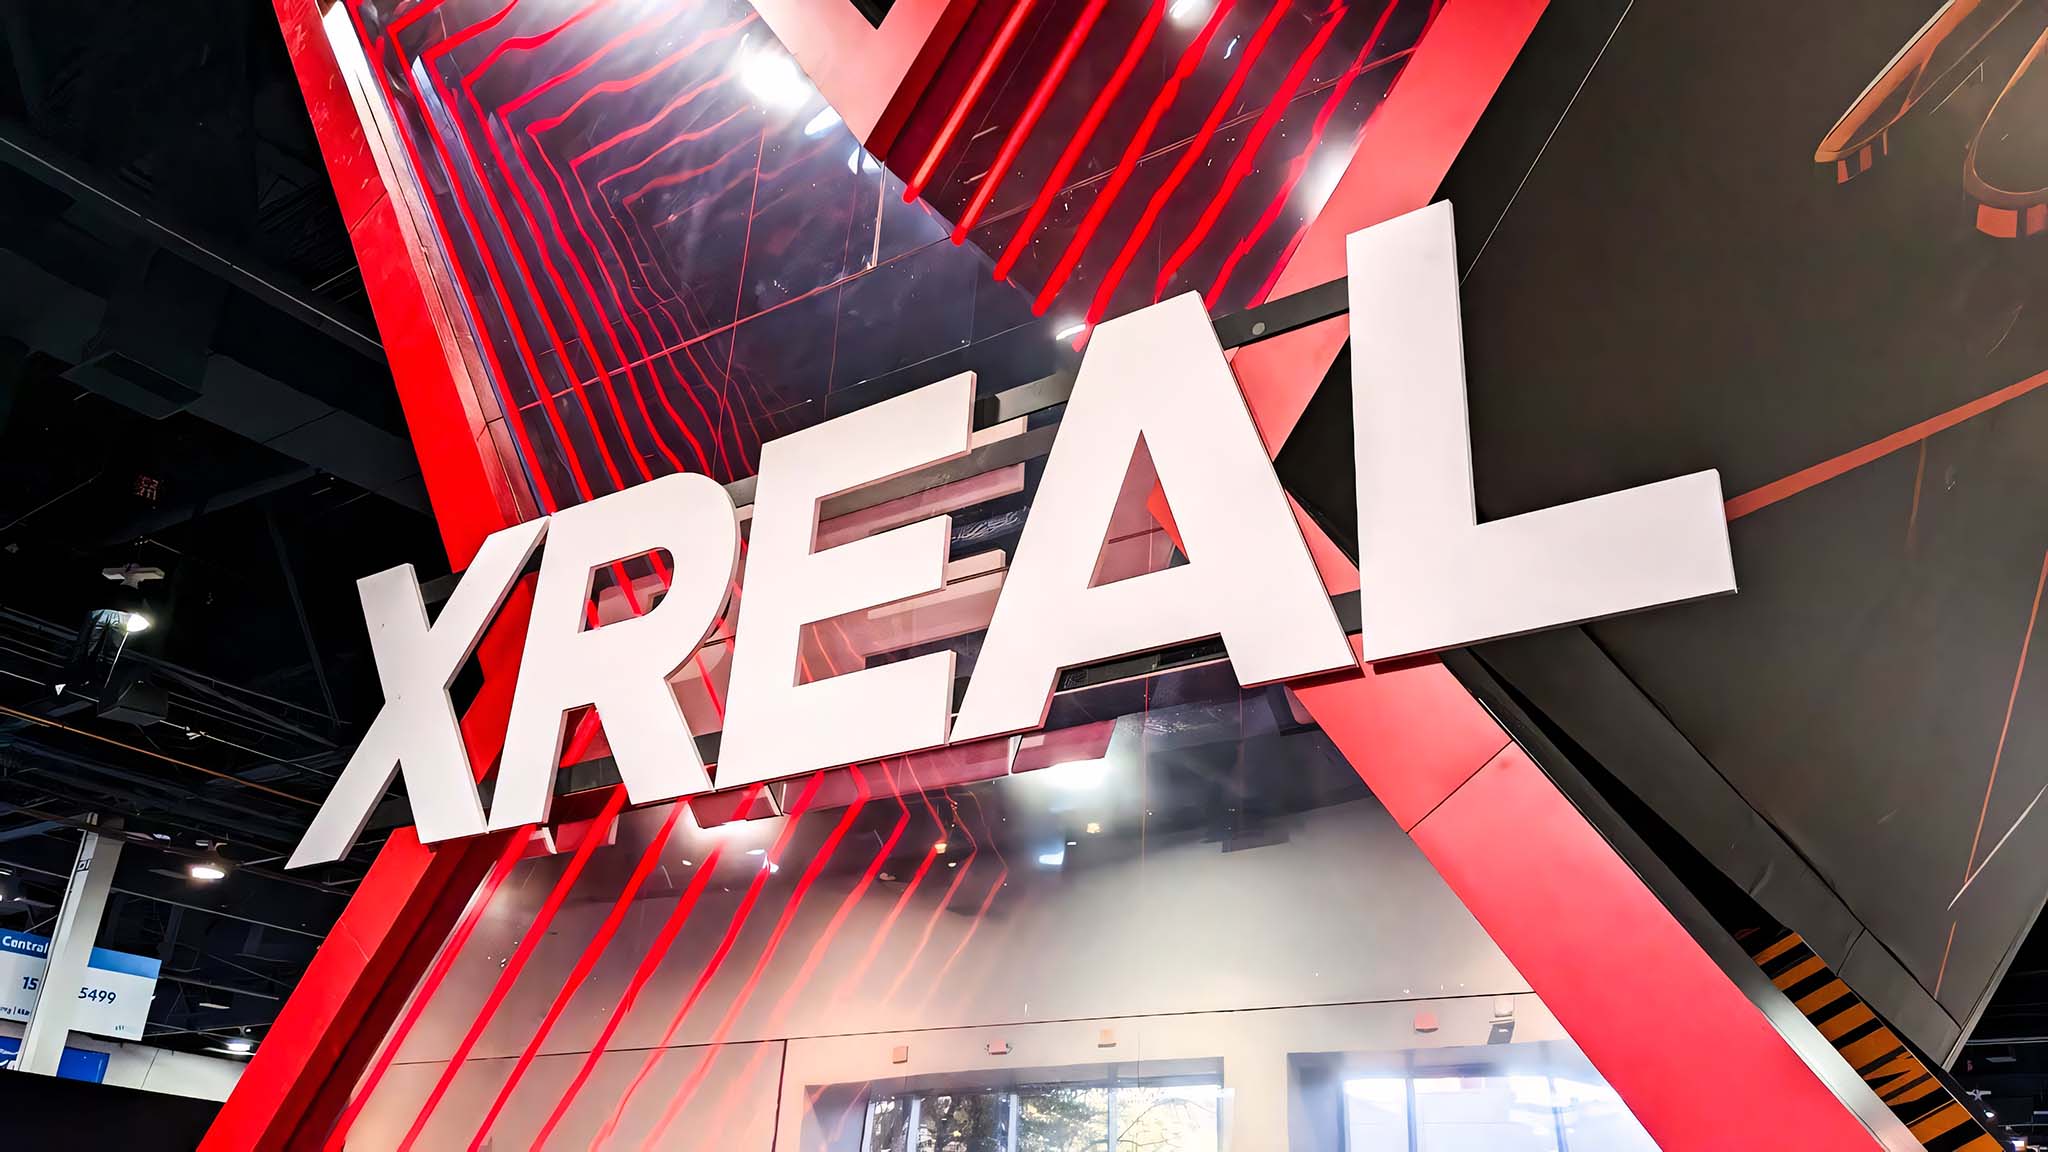 XREAL glasses make AR gaming more approachable than ever